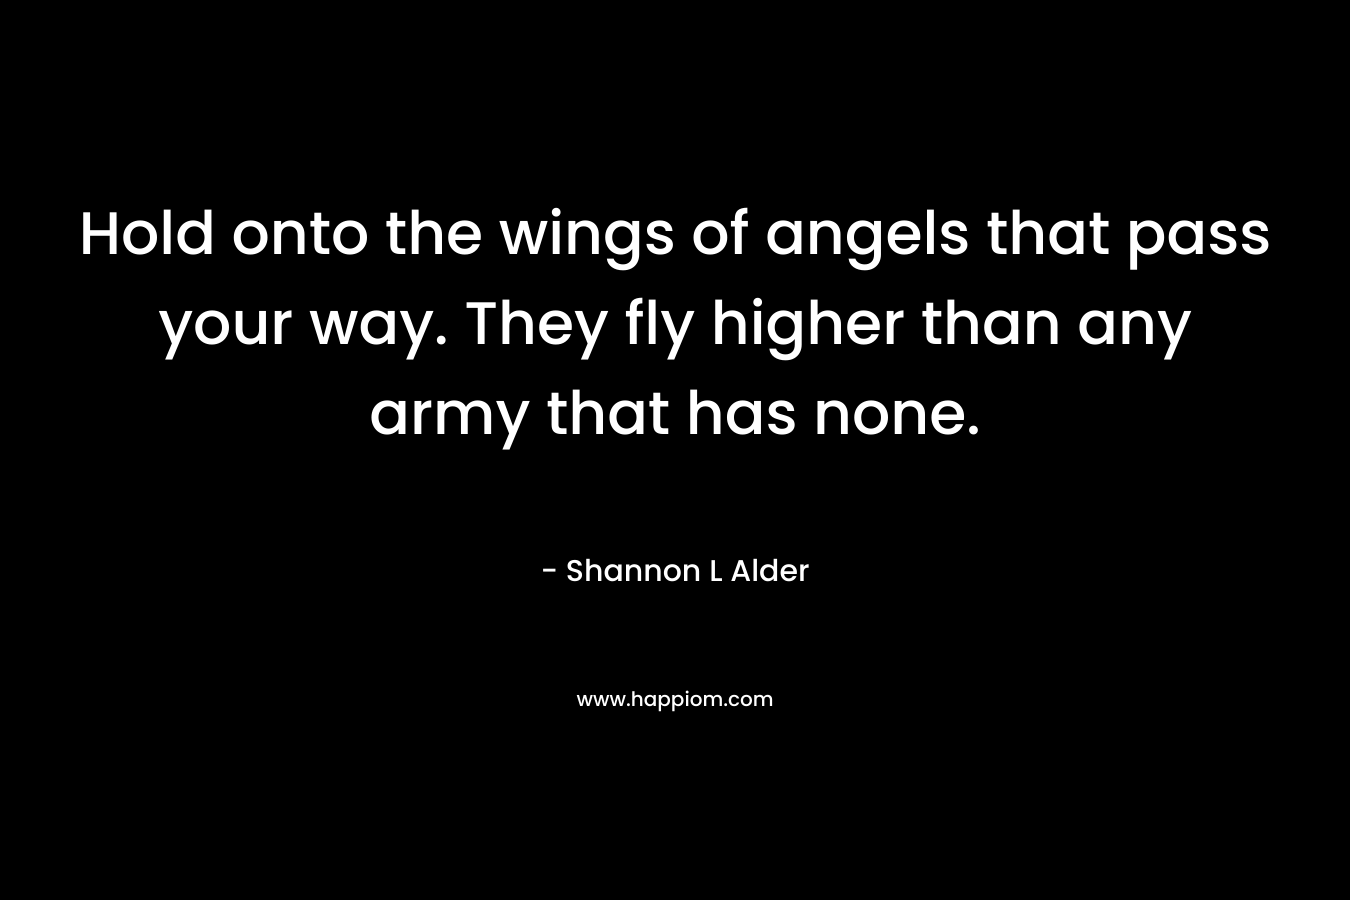 Hold onto the wings of angels that pass your way. They fly higher than any army that has none. – Shannon L Alder